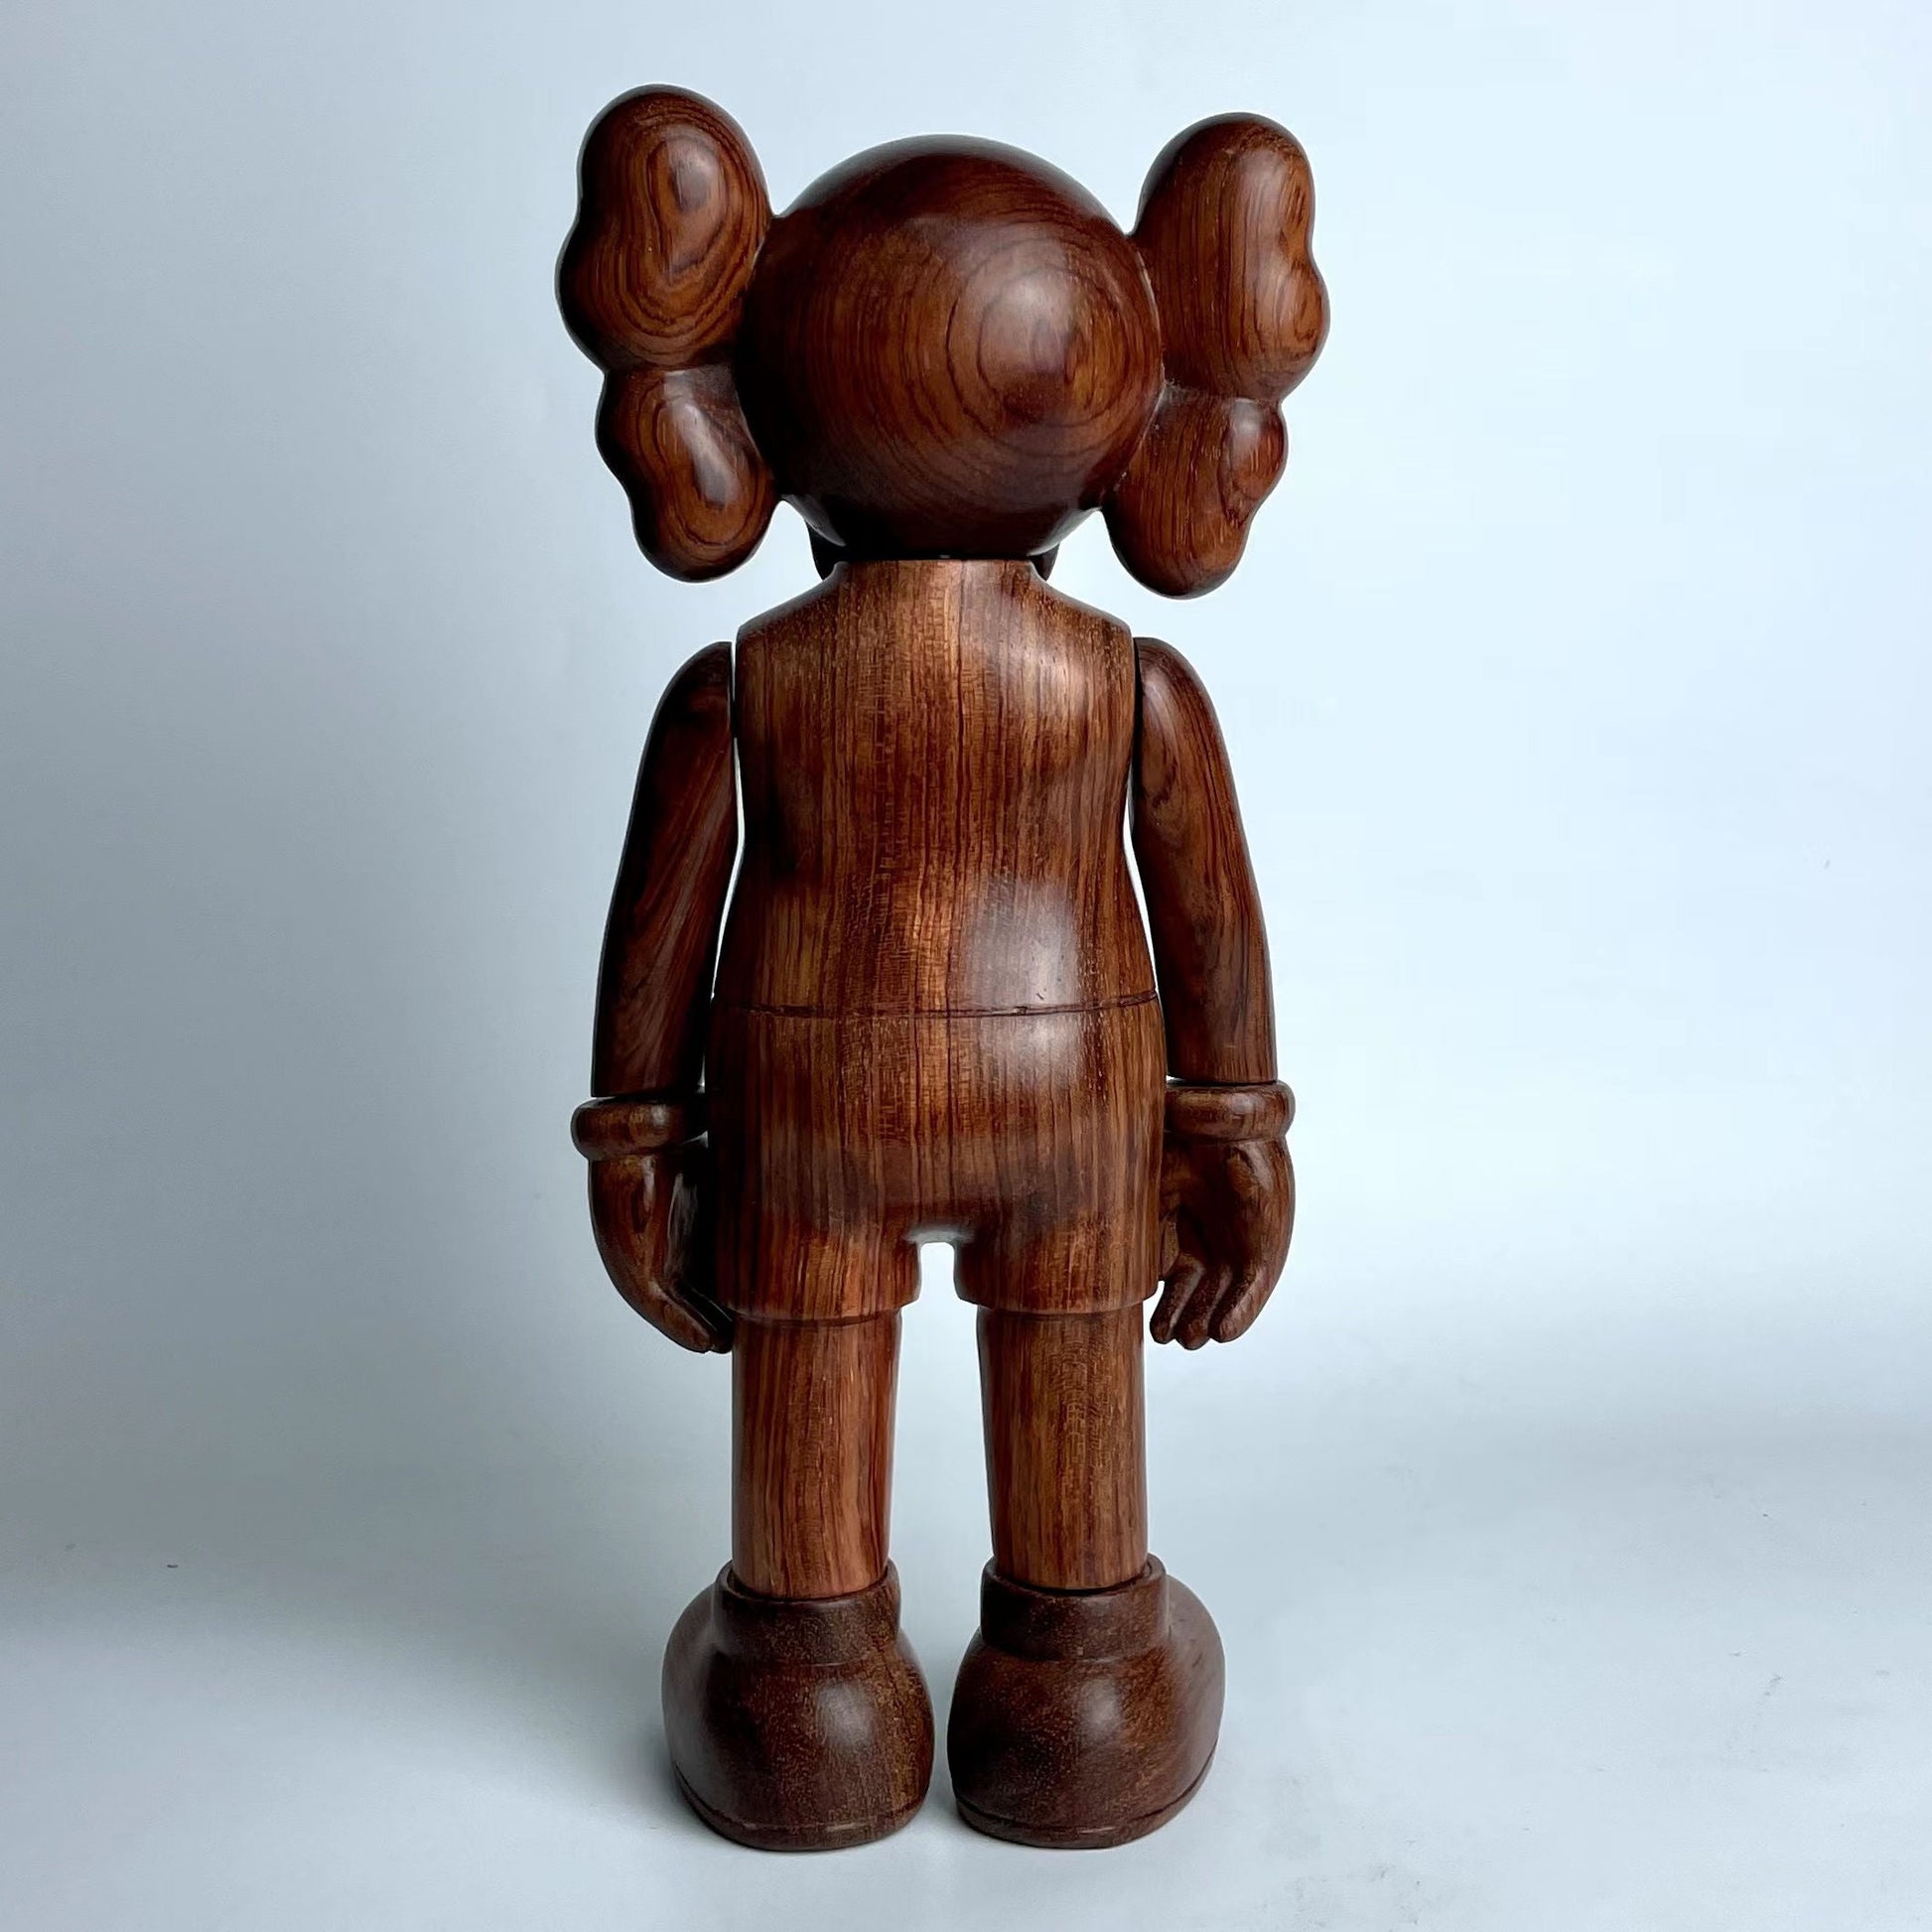 Hobby - 28cm 400% KAW Bearbrick Wooden Prototype Anime Action Figure With Wooden Box